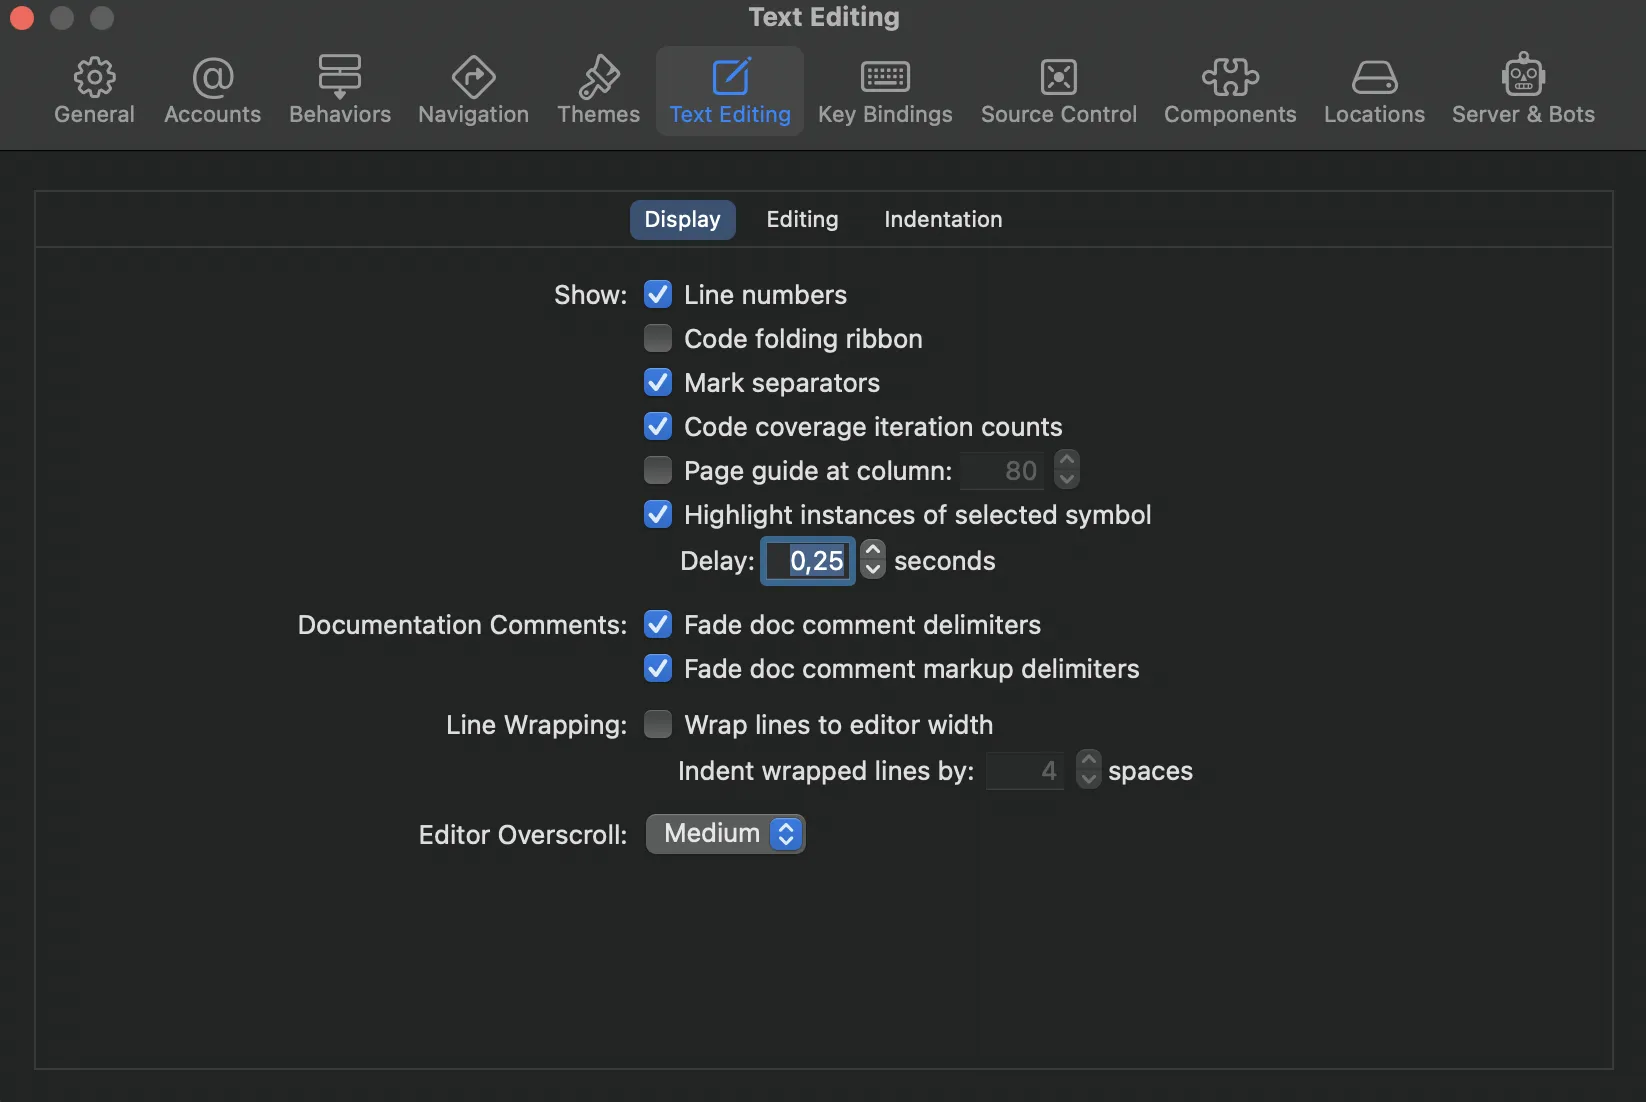 Xcode -> Preferences... -> Text Editing -> Display -> Line Wrapping